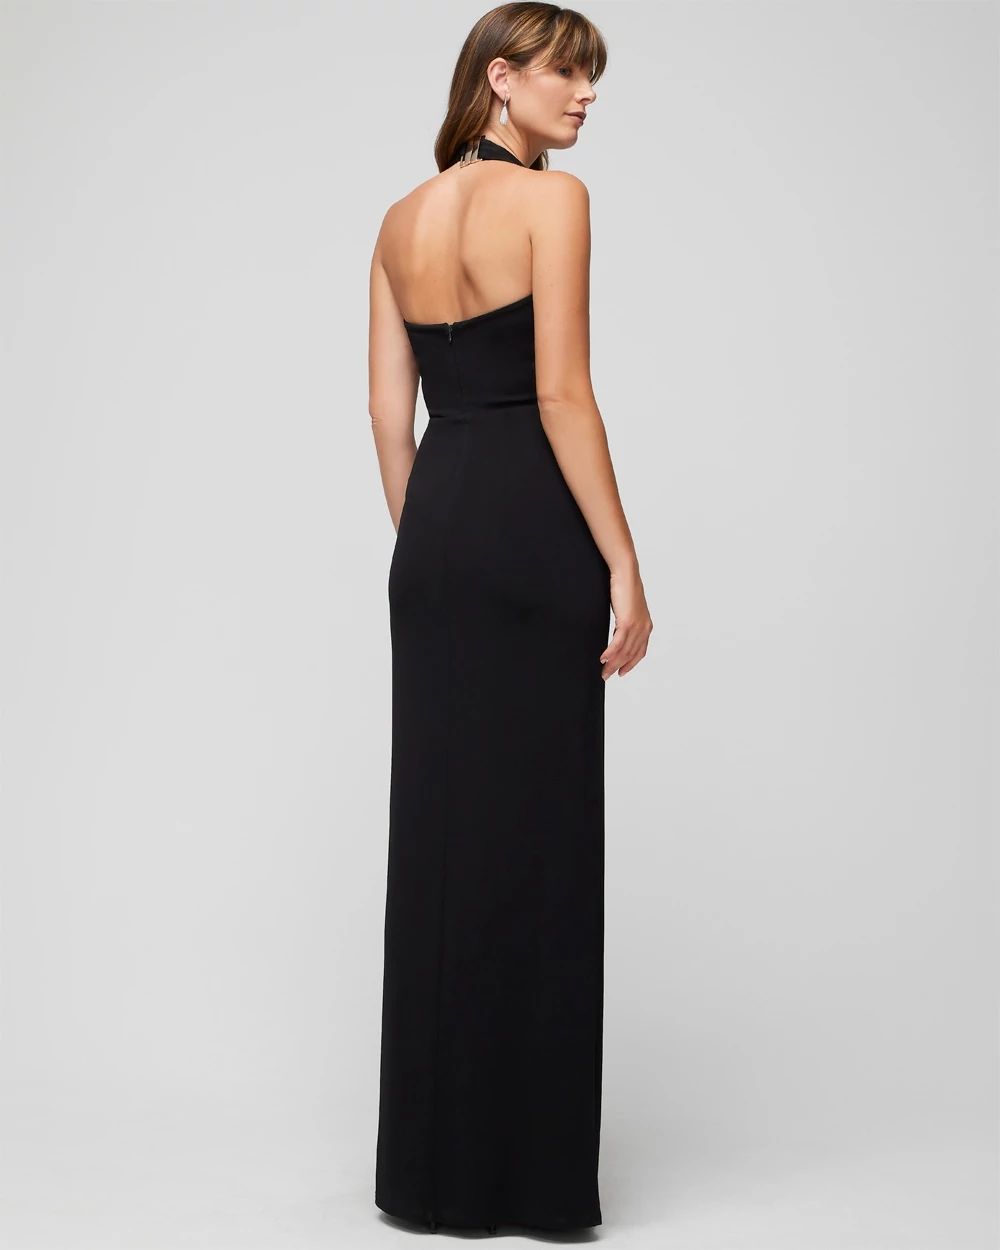 Halter Draped Matte Jersey Dress With Slit click to view larger image.